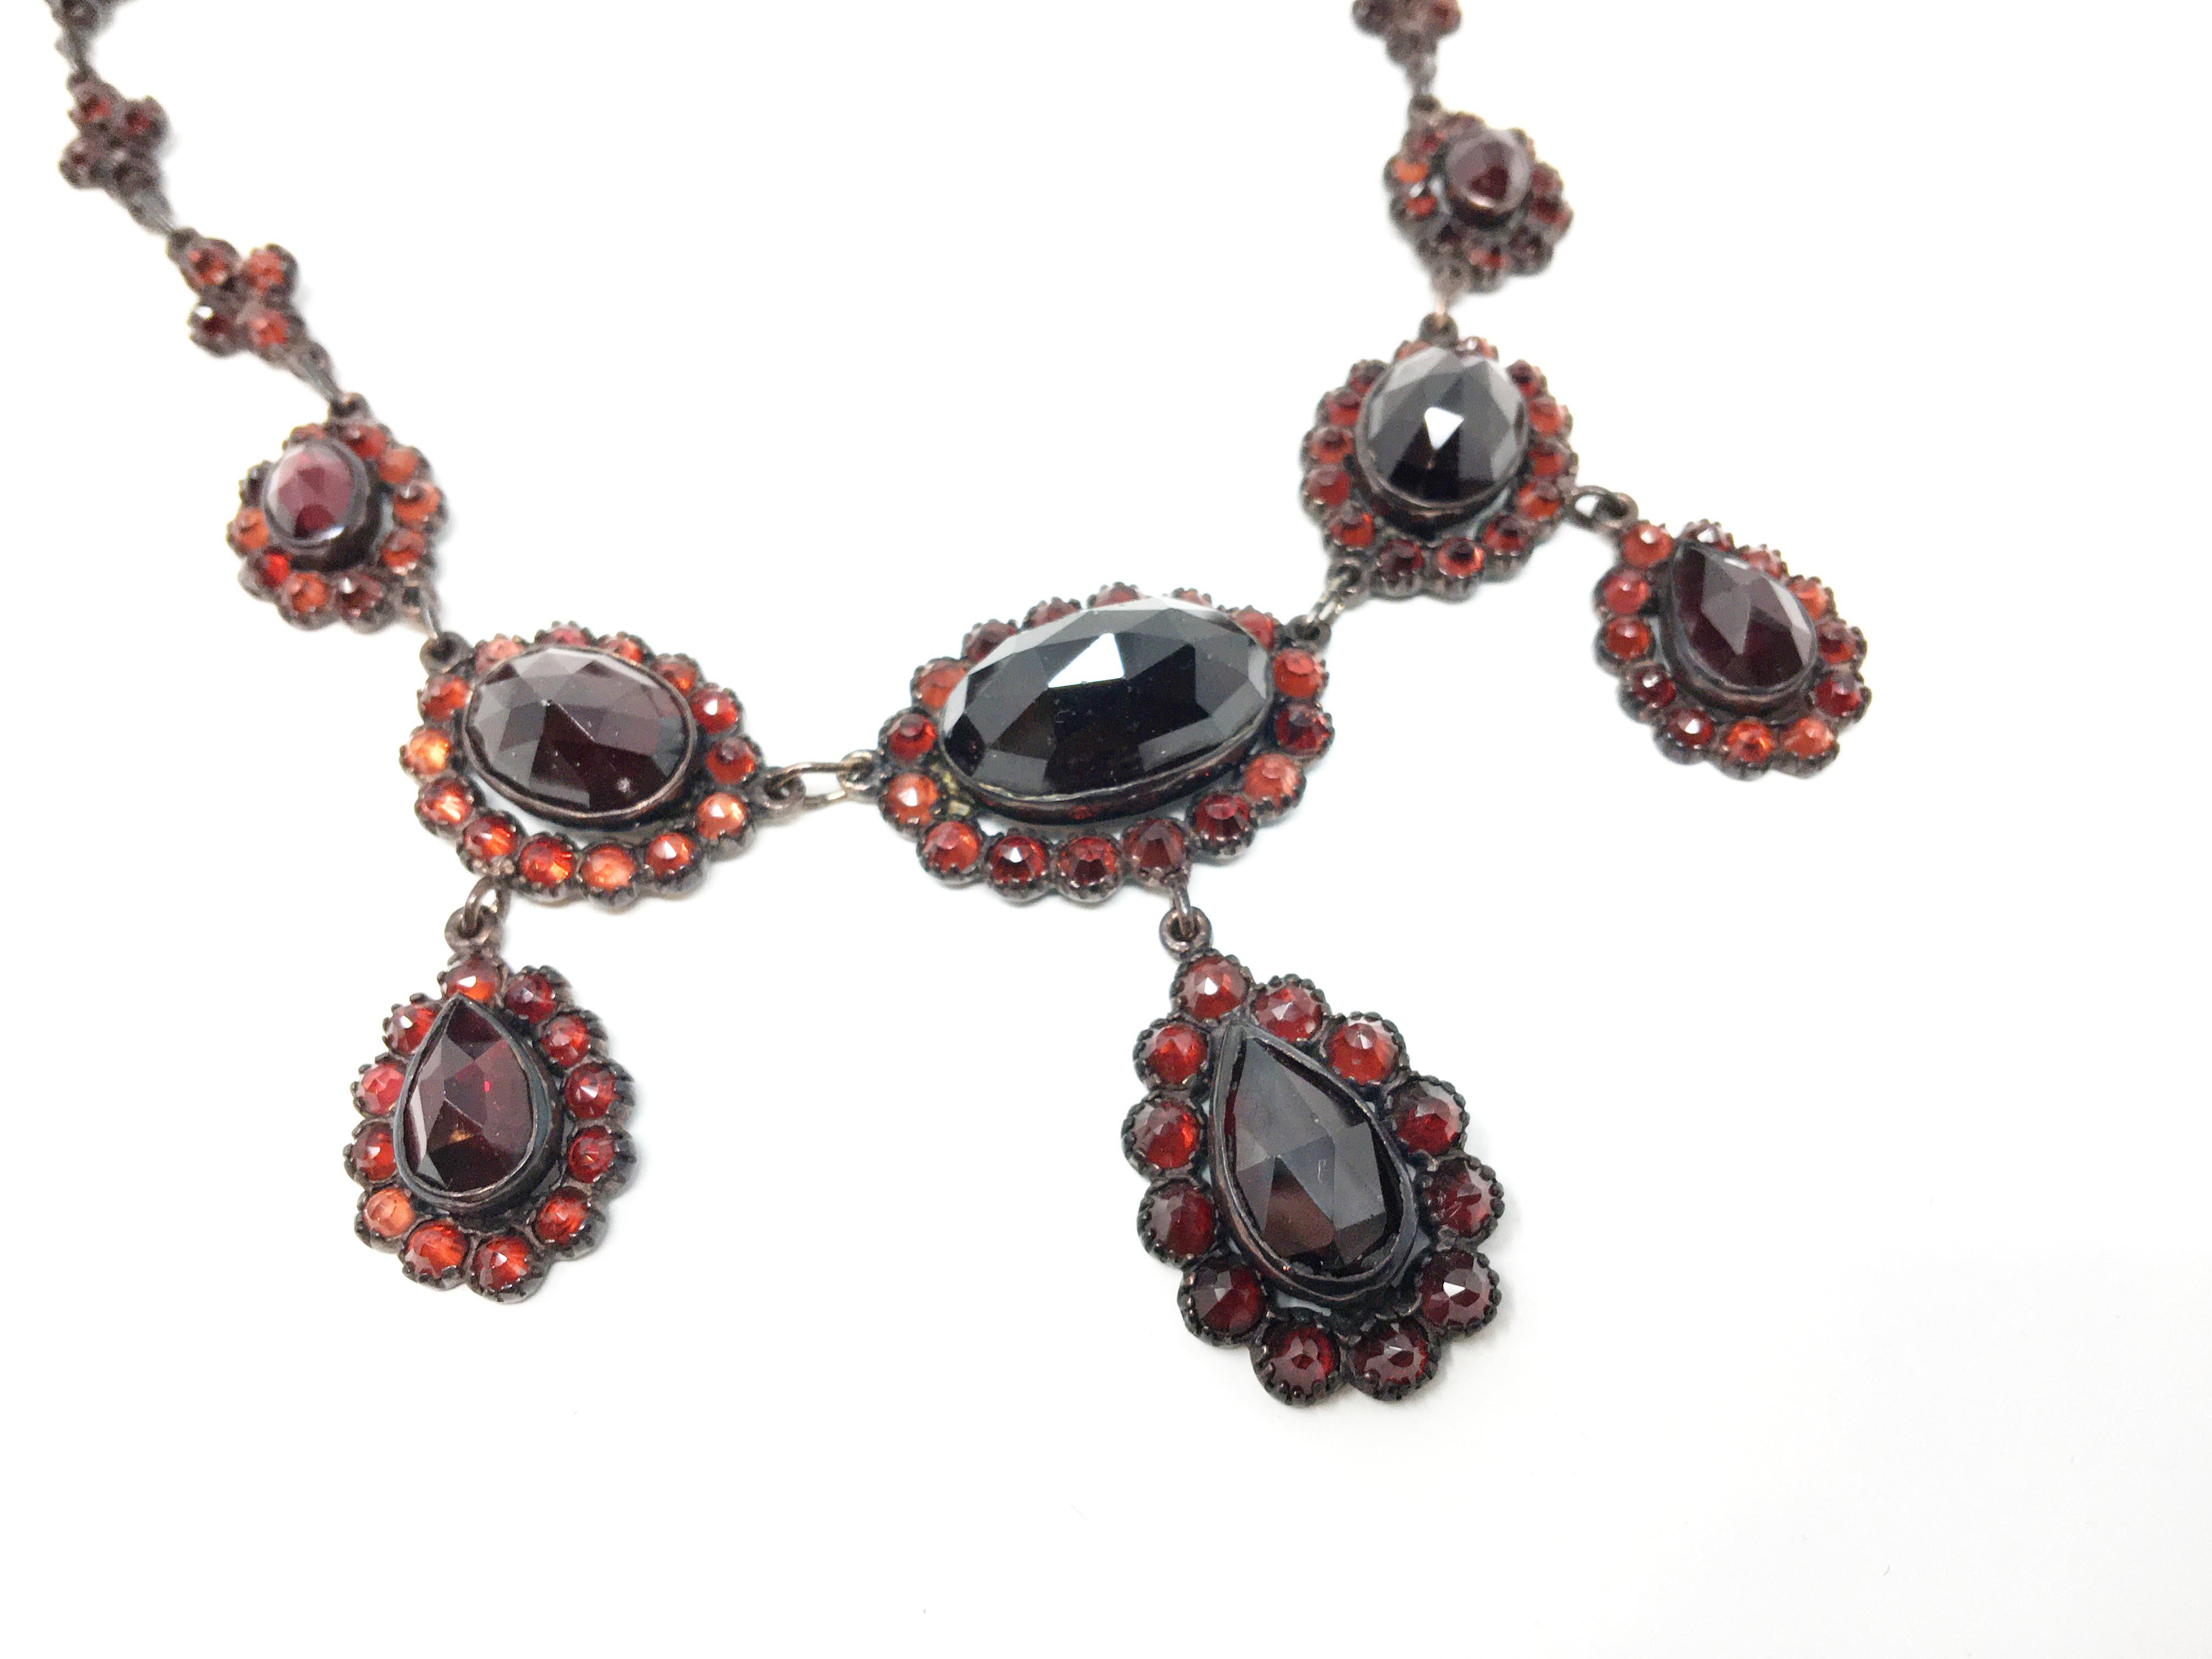 Beautiful Bohemian drop Garnet necklace. “pigeon blood” garnets set in an aged patina, Gilt silver (Gilded Rose tone metal over 625). Wear consistent with use and age, a few chips on the larger garnets. Length Necklace is 16.5